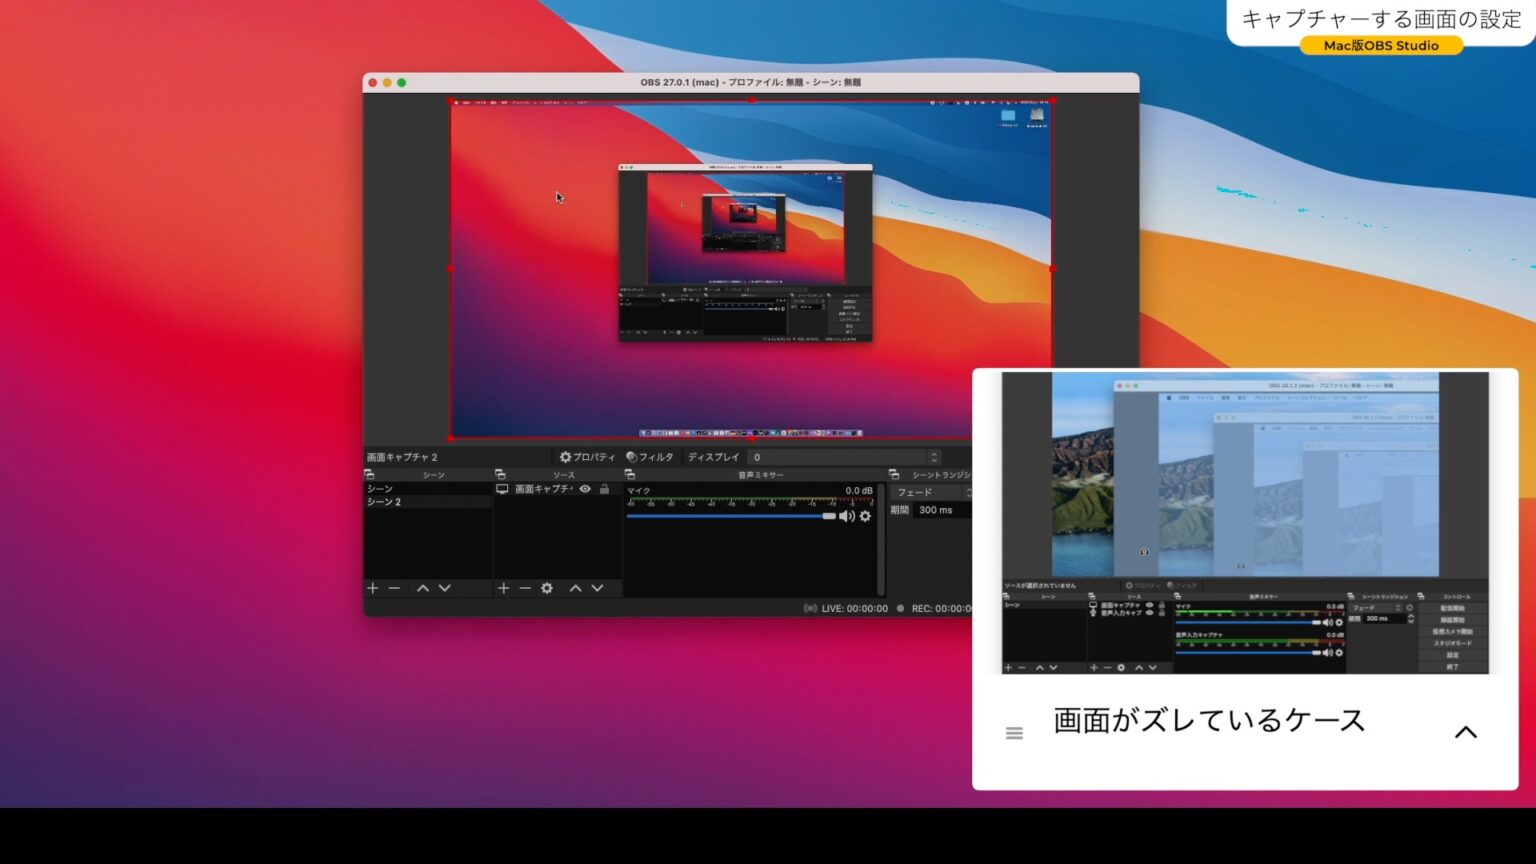 elgato not showing up in obs studio mac